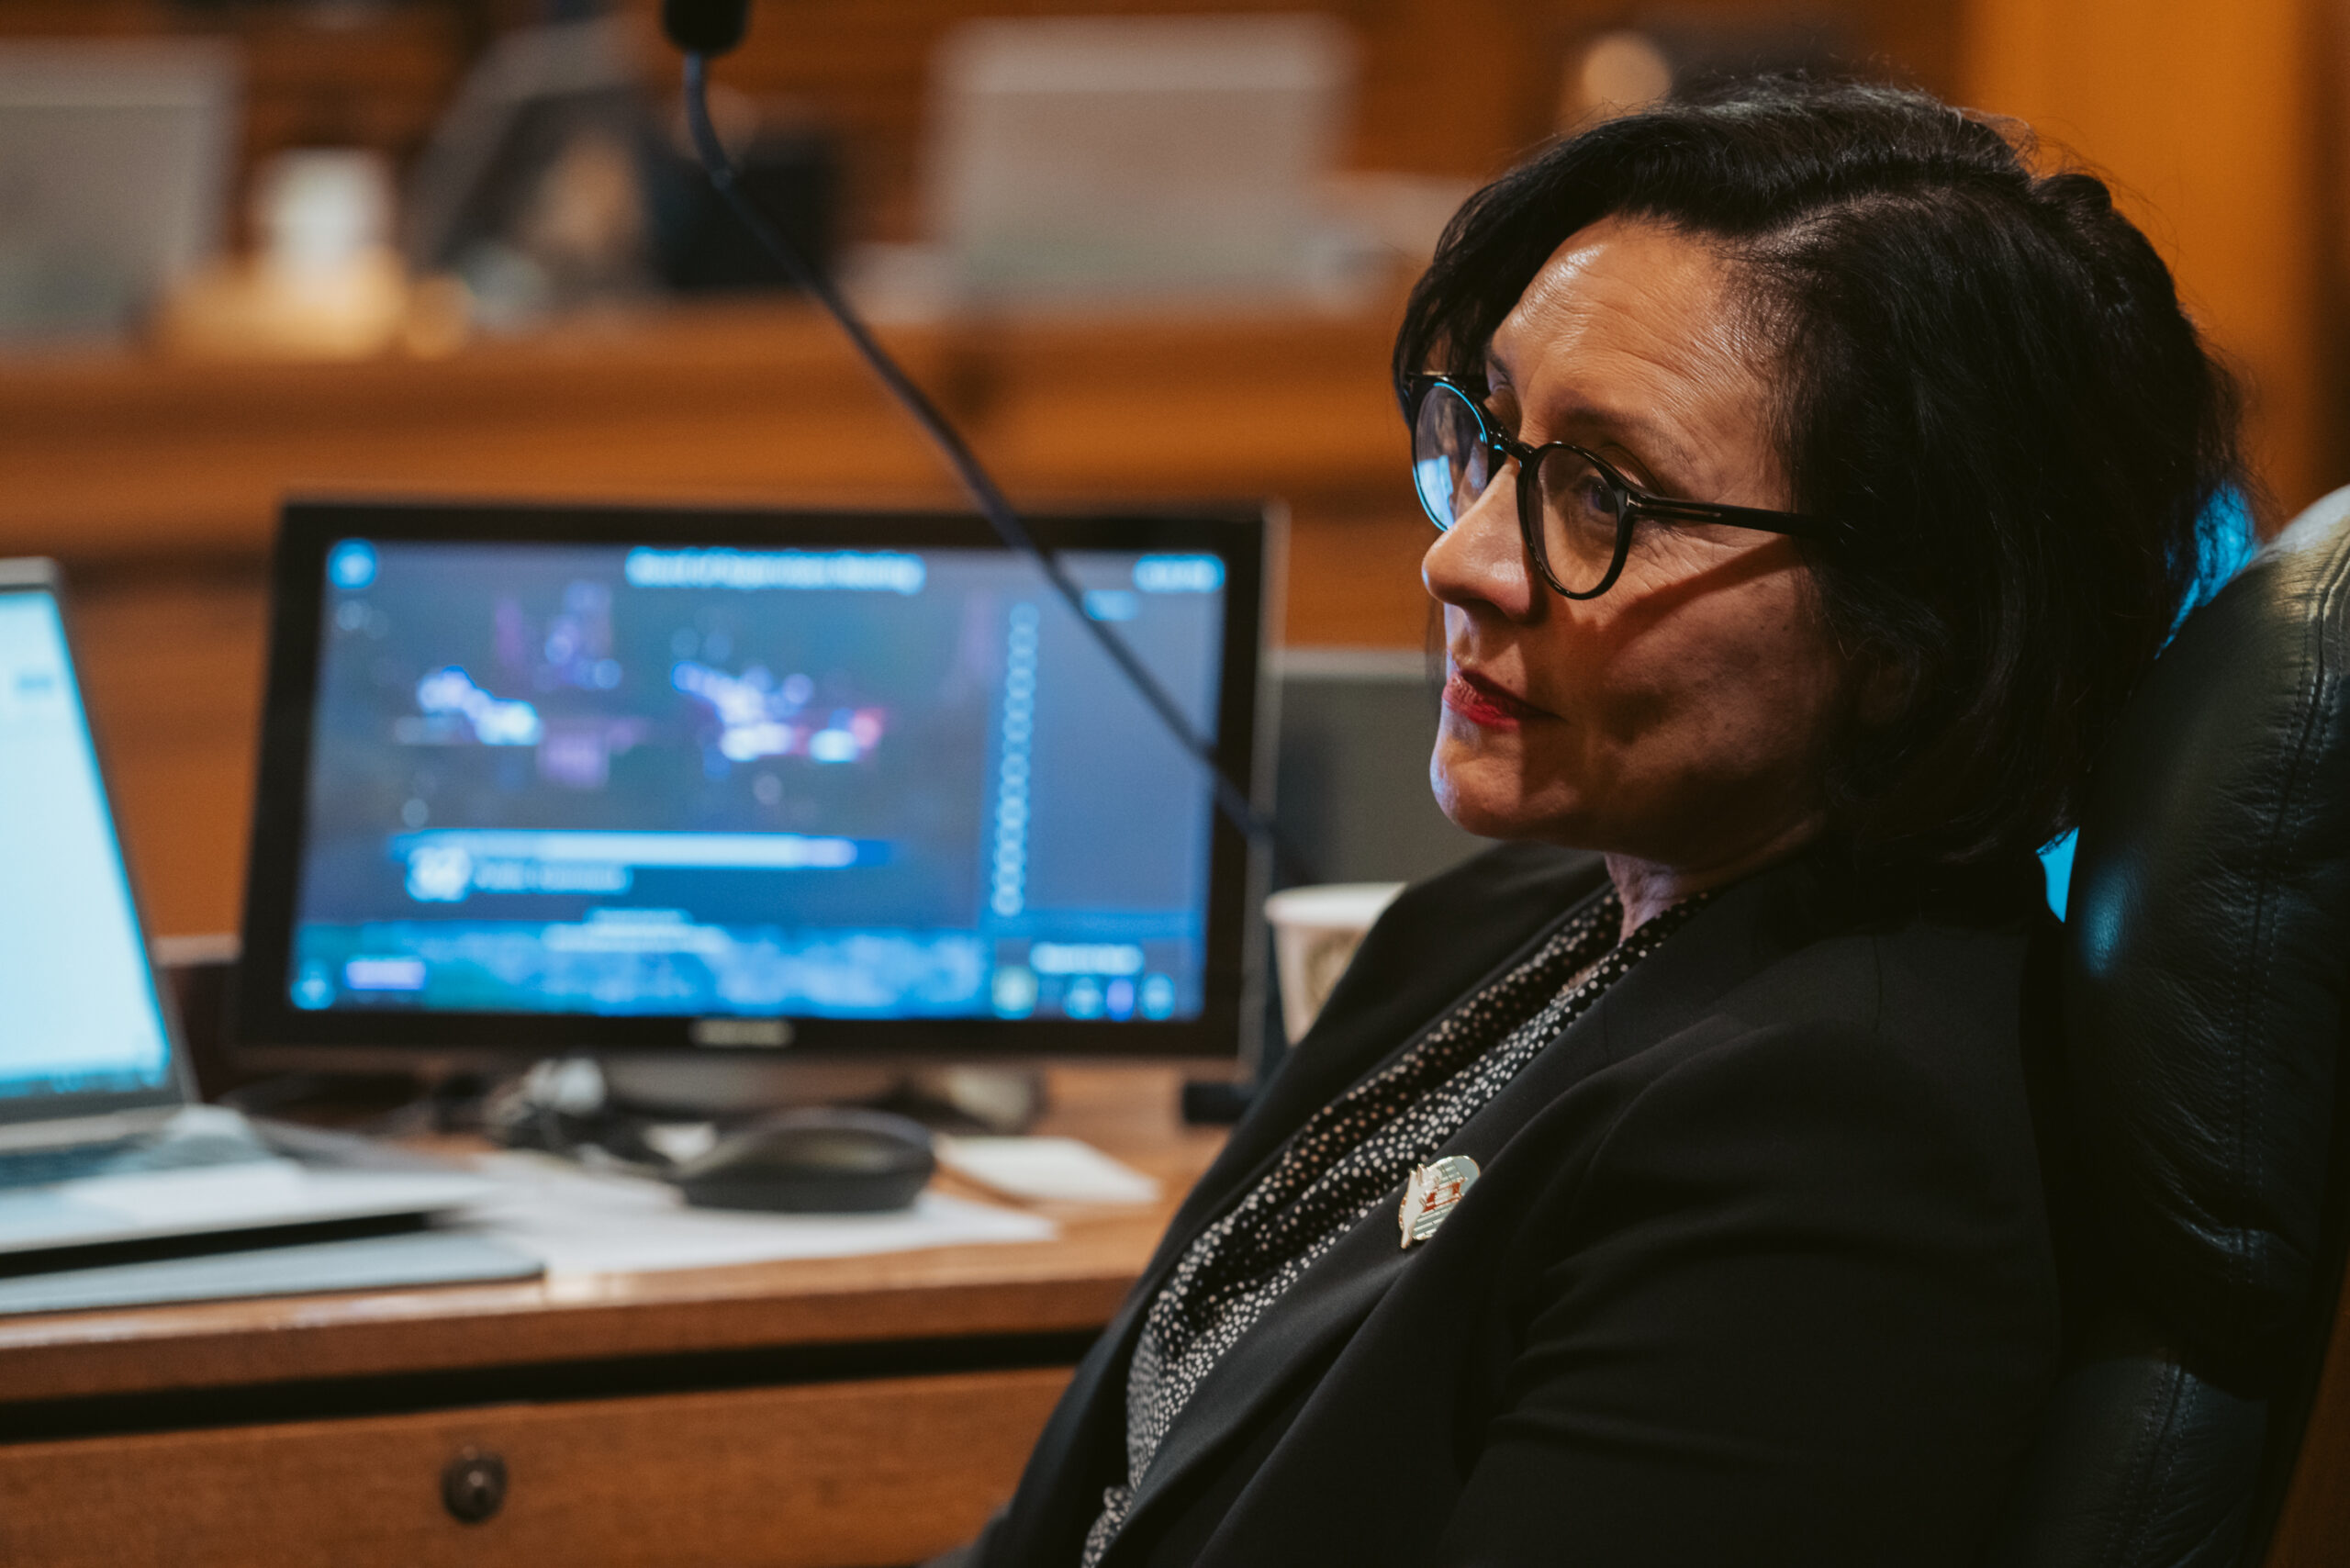 Supervisor Myrna Melgar during a Board of Supervisors meeting at City Hall in San Francisco. Lawmakers are navigating a complex procedural gambit to pass legislation to comply with state housing mandates by a second deadline or face consequences from Sacramento. | Michaela Vatcheva for The Standard